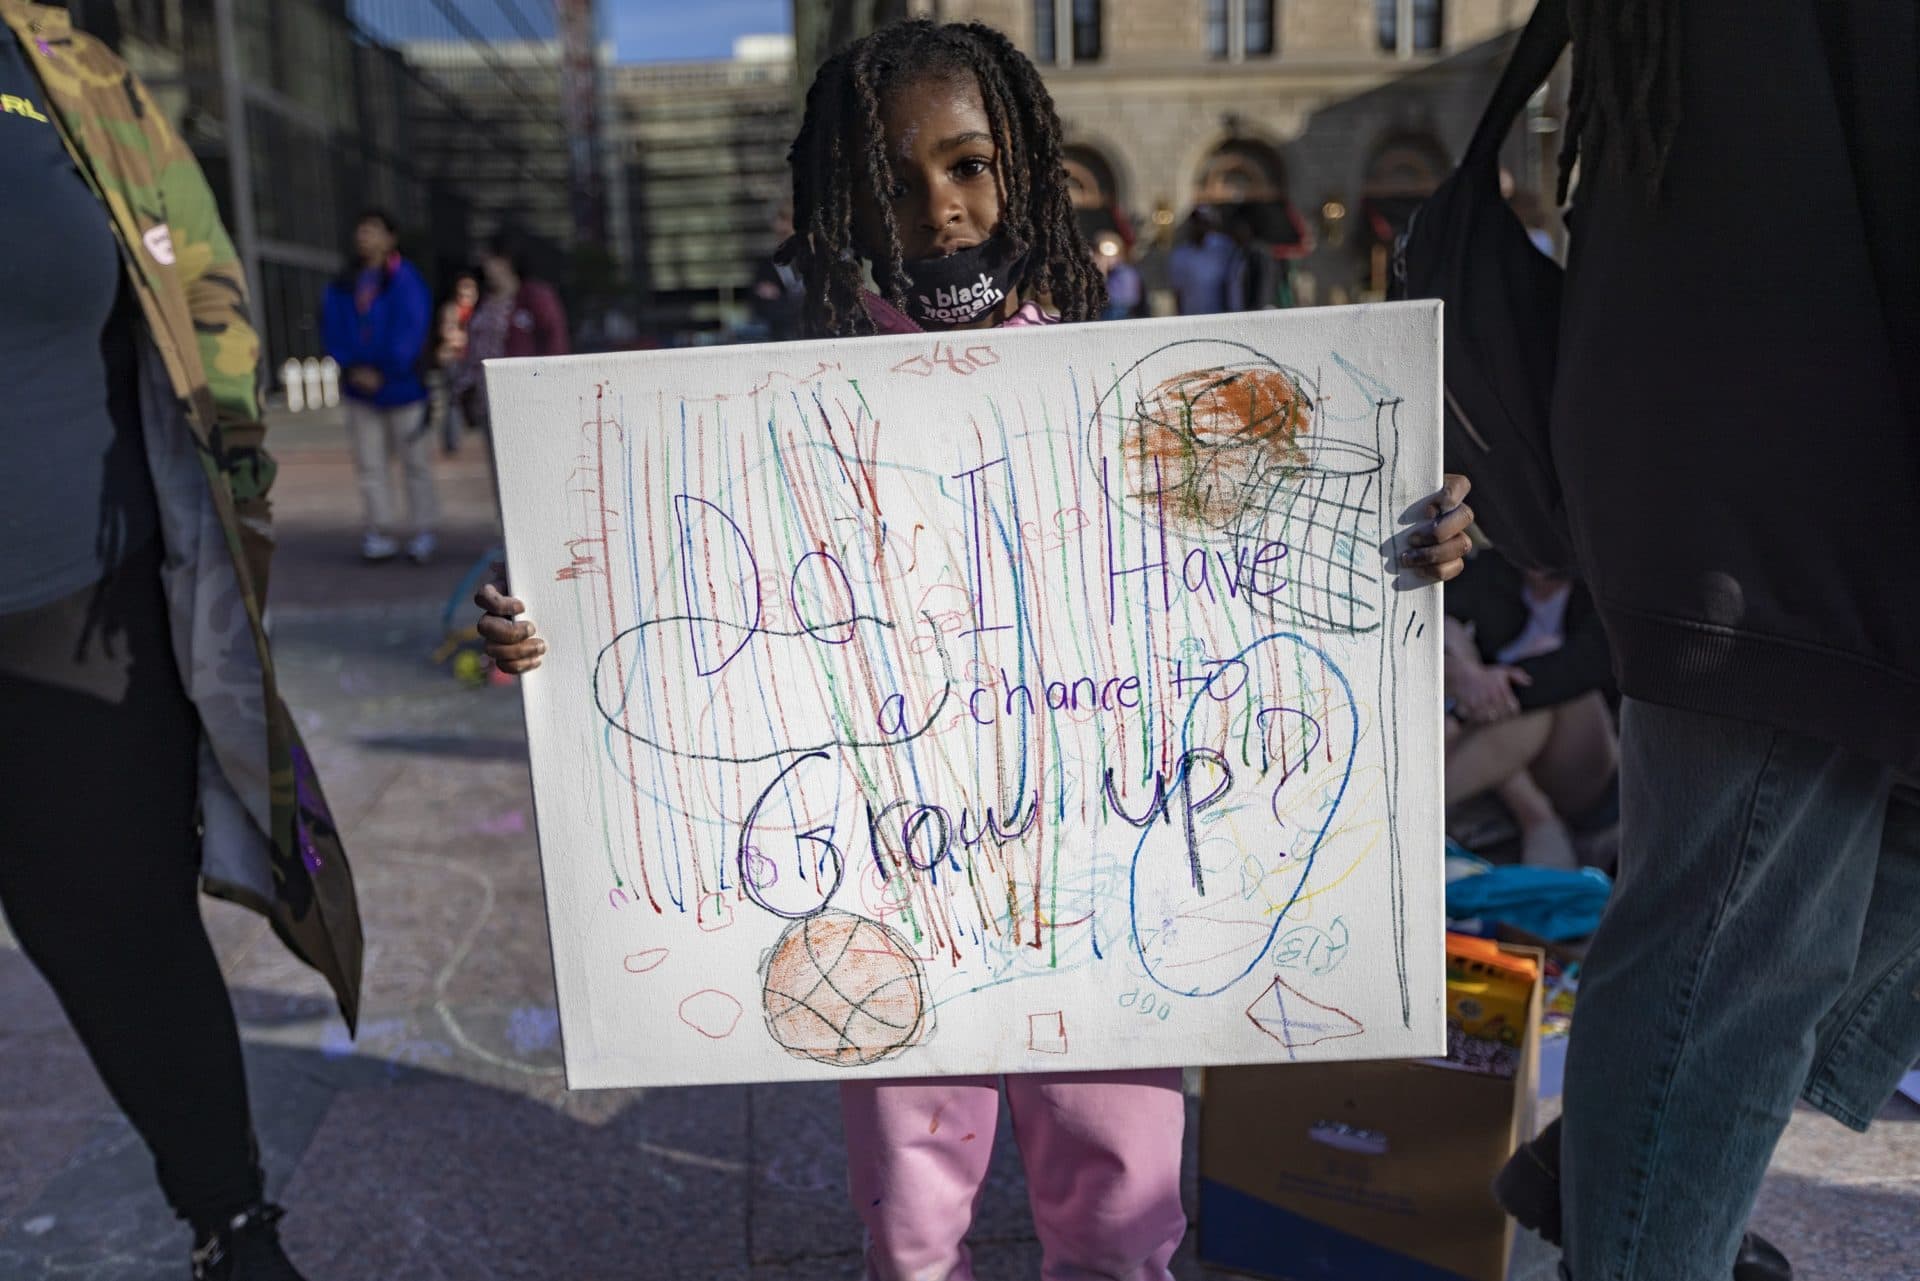 Chloe Matthews, 6, holds a sign that reads, “Do I have a chance to grow up?” (Jesse Costa/WBUR)